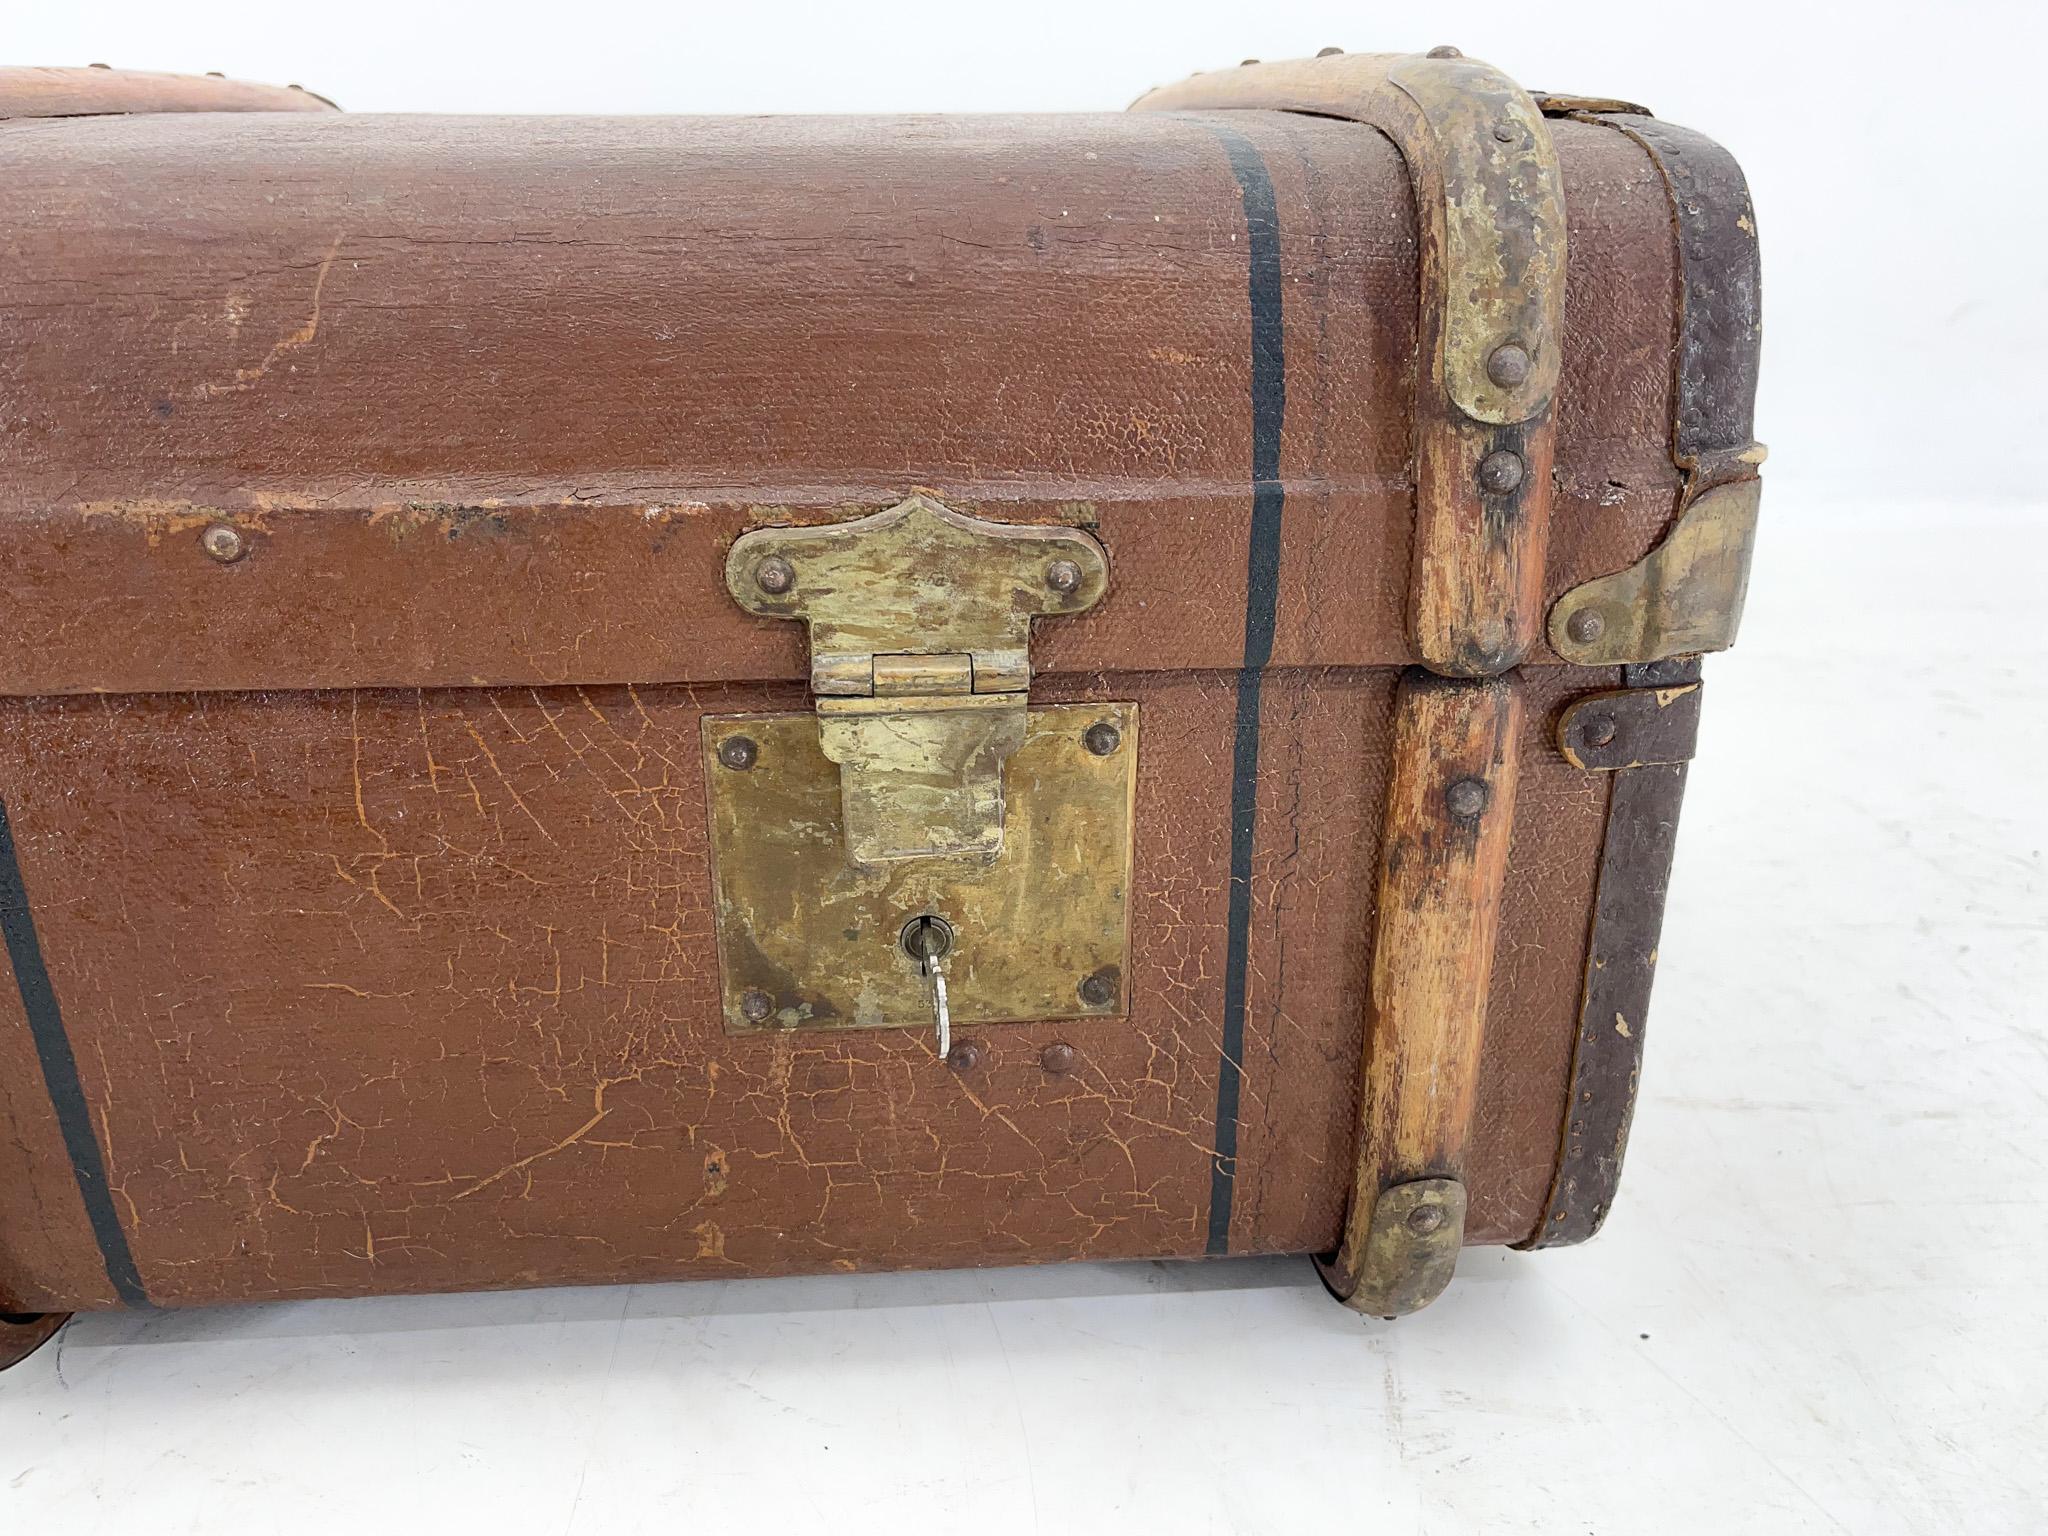 Czech 1920's, Wood Strapped Travel Trunk / Suitcase 